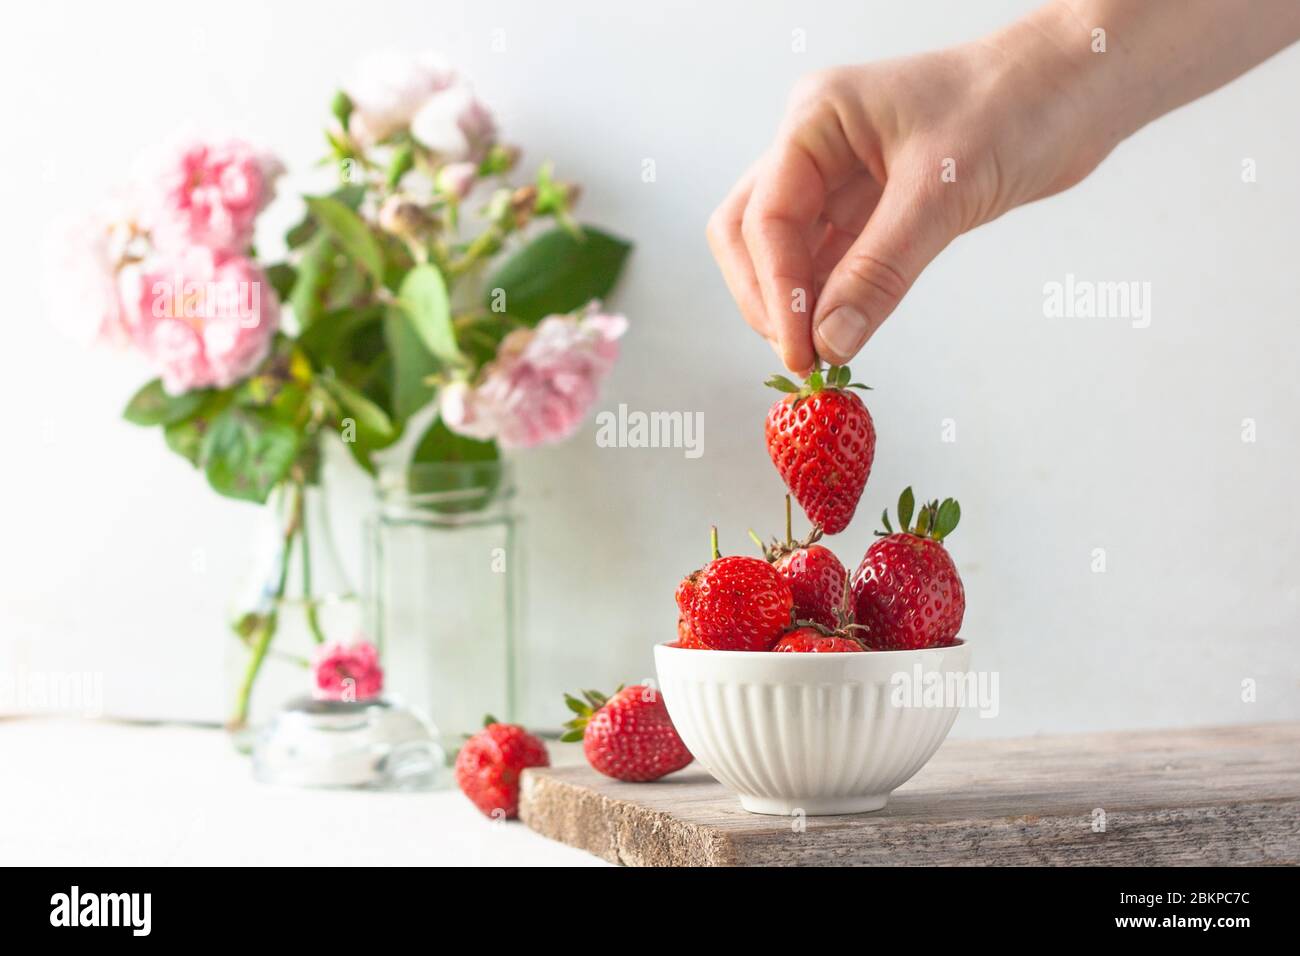 Woman takes or puts one strowberry in fruit bowl full of fresh, red, jucy strawberries. Pastel-colored decoration.  Stock Photo